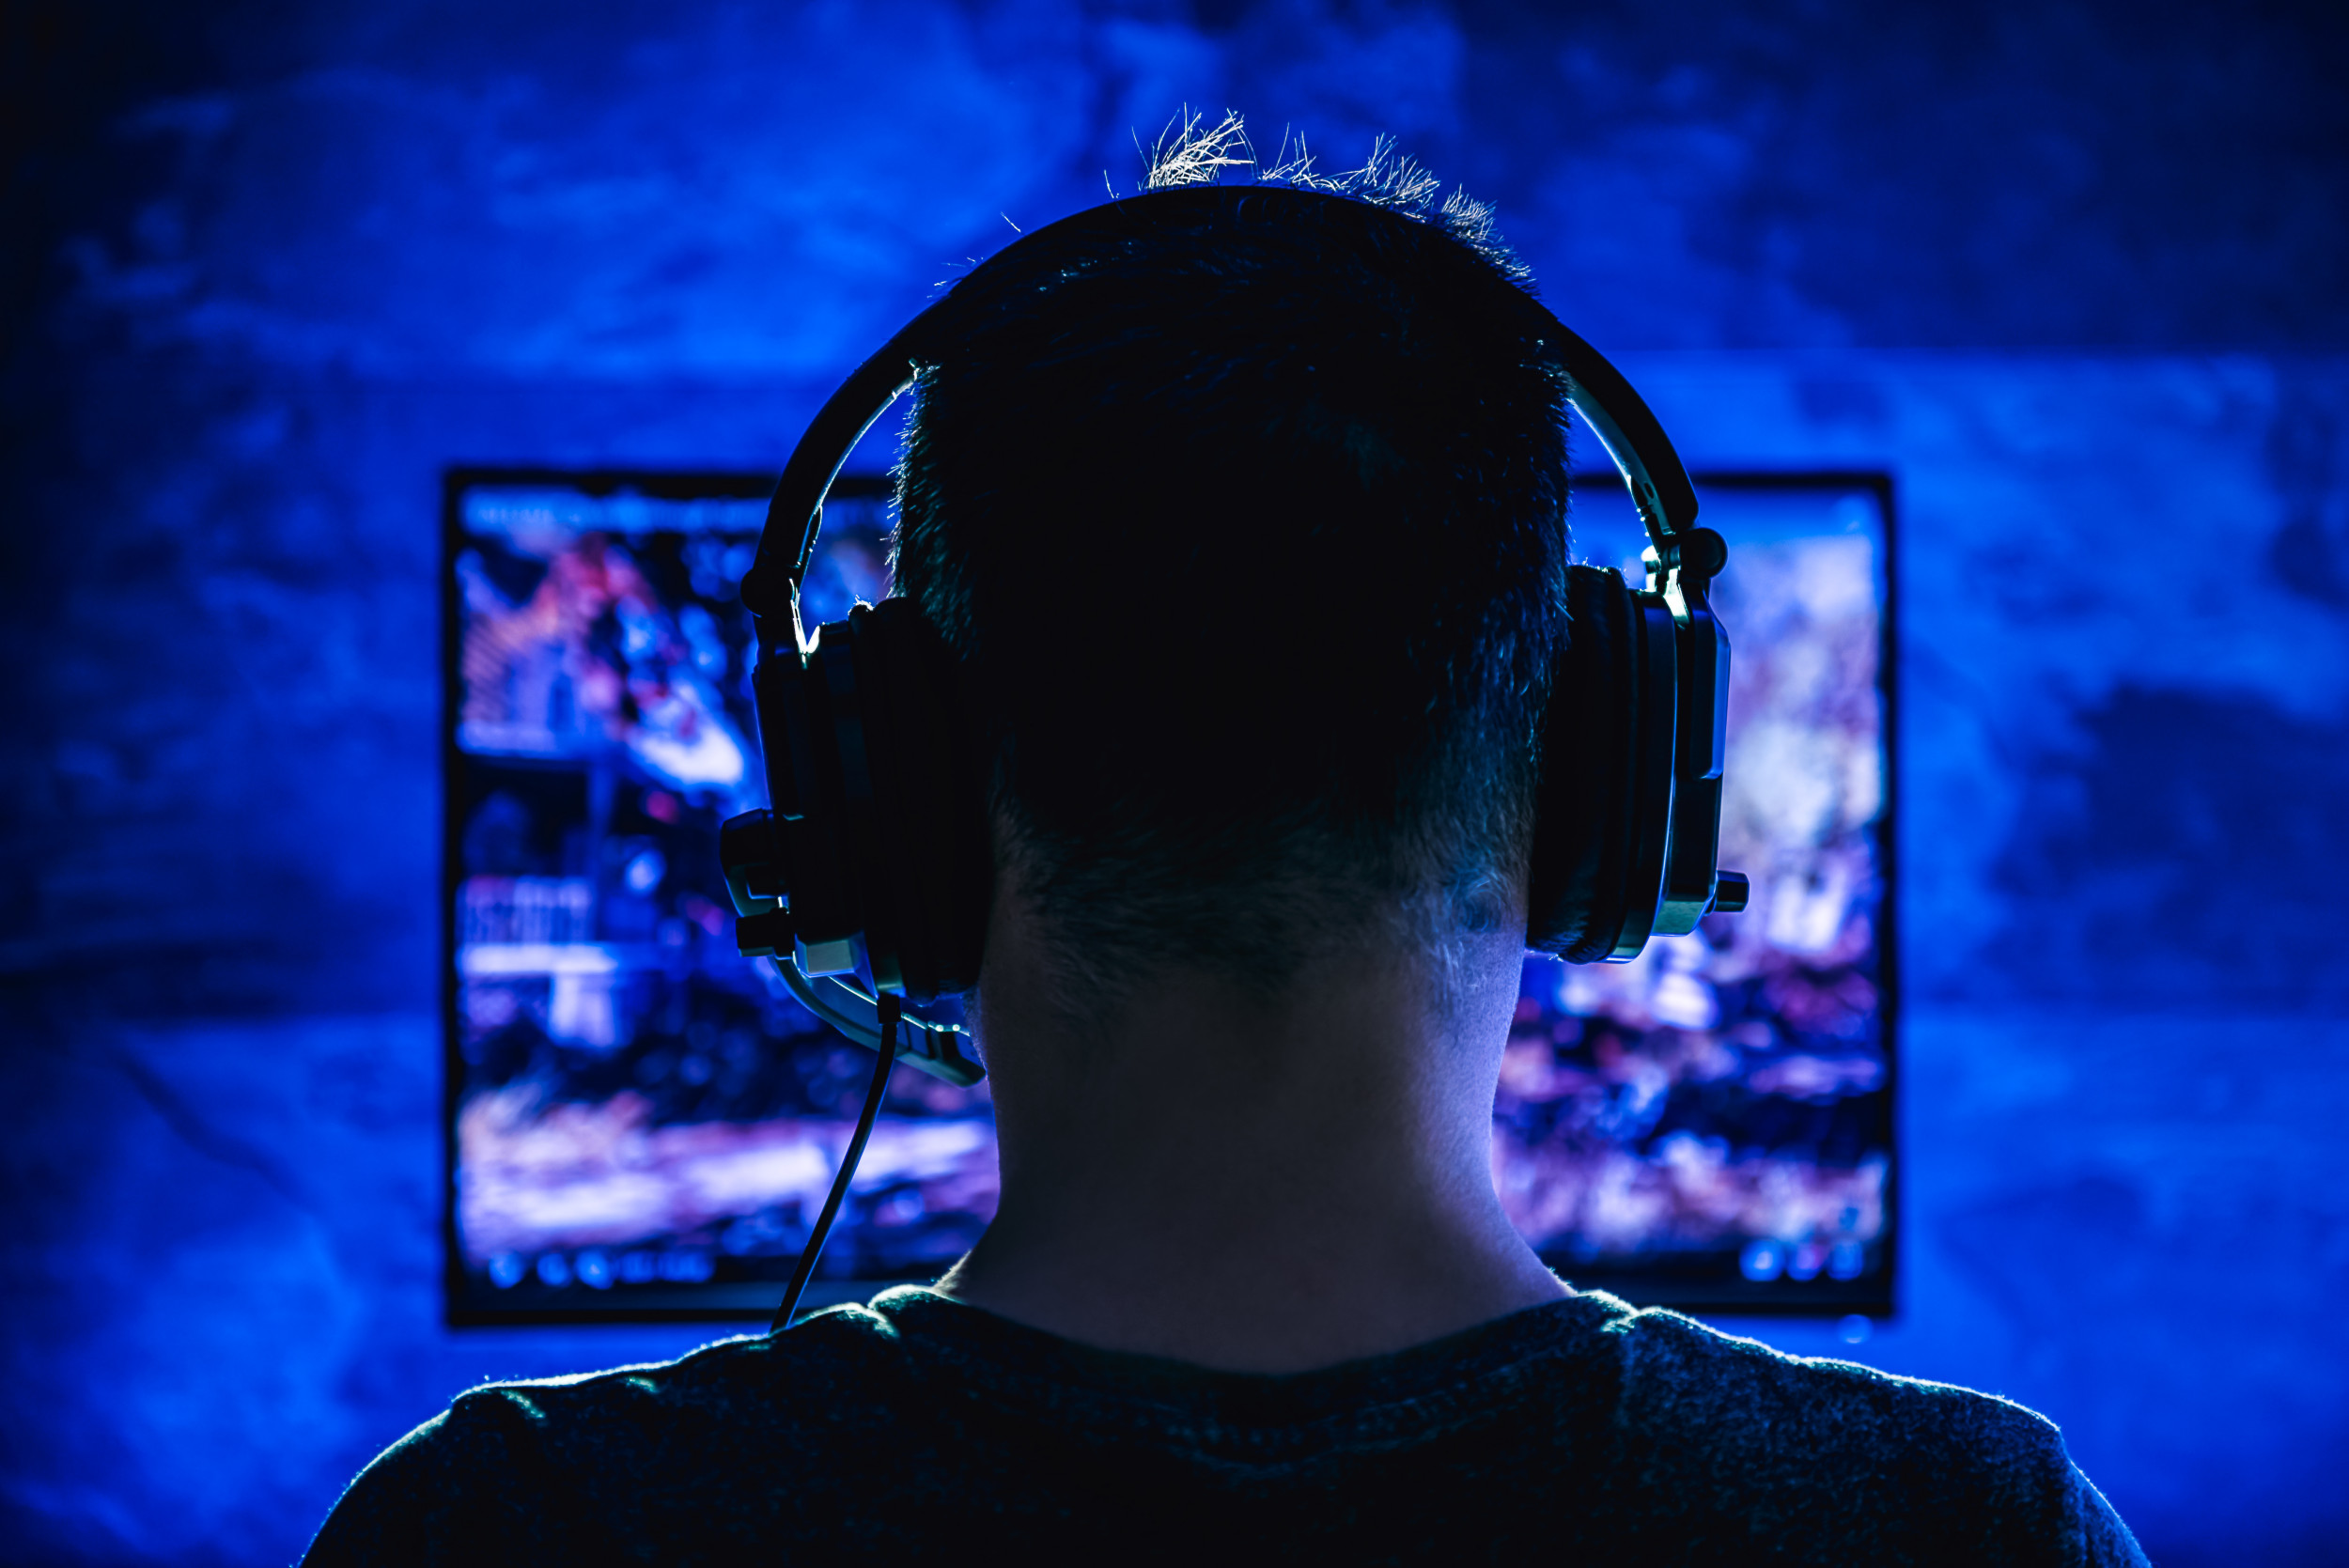 teen psychosis risk may be linked to computer and video game use